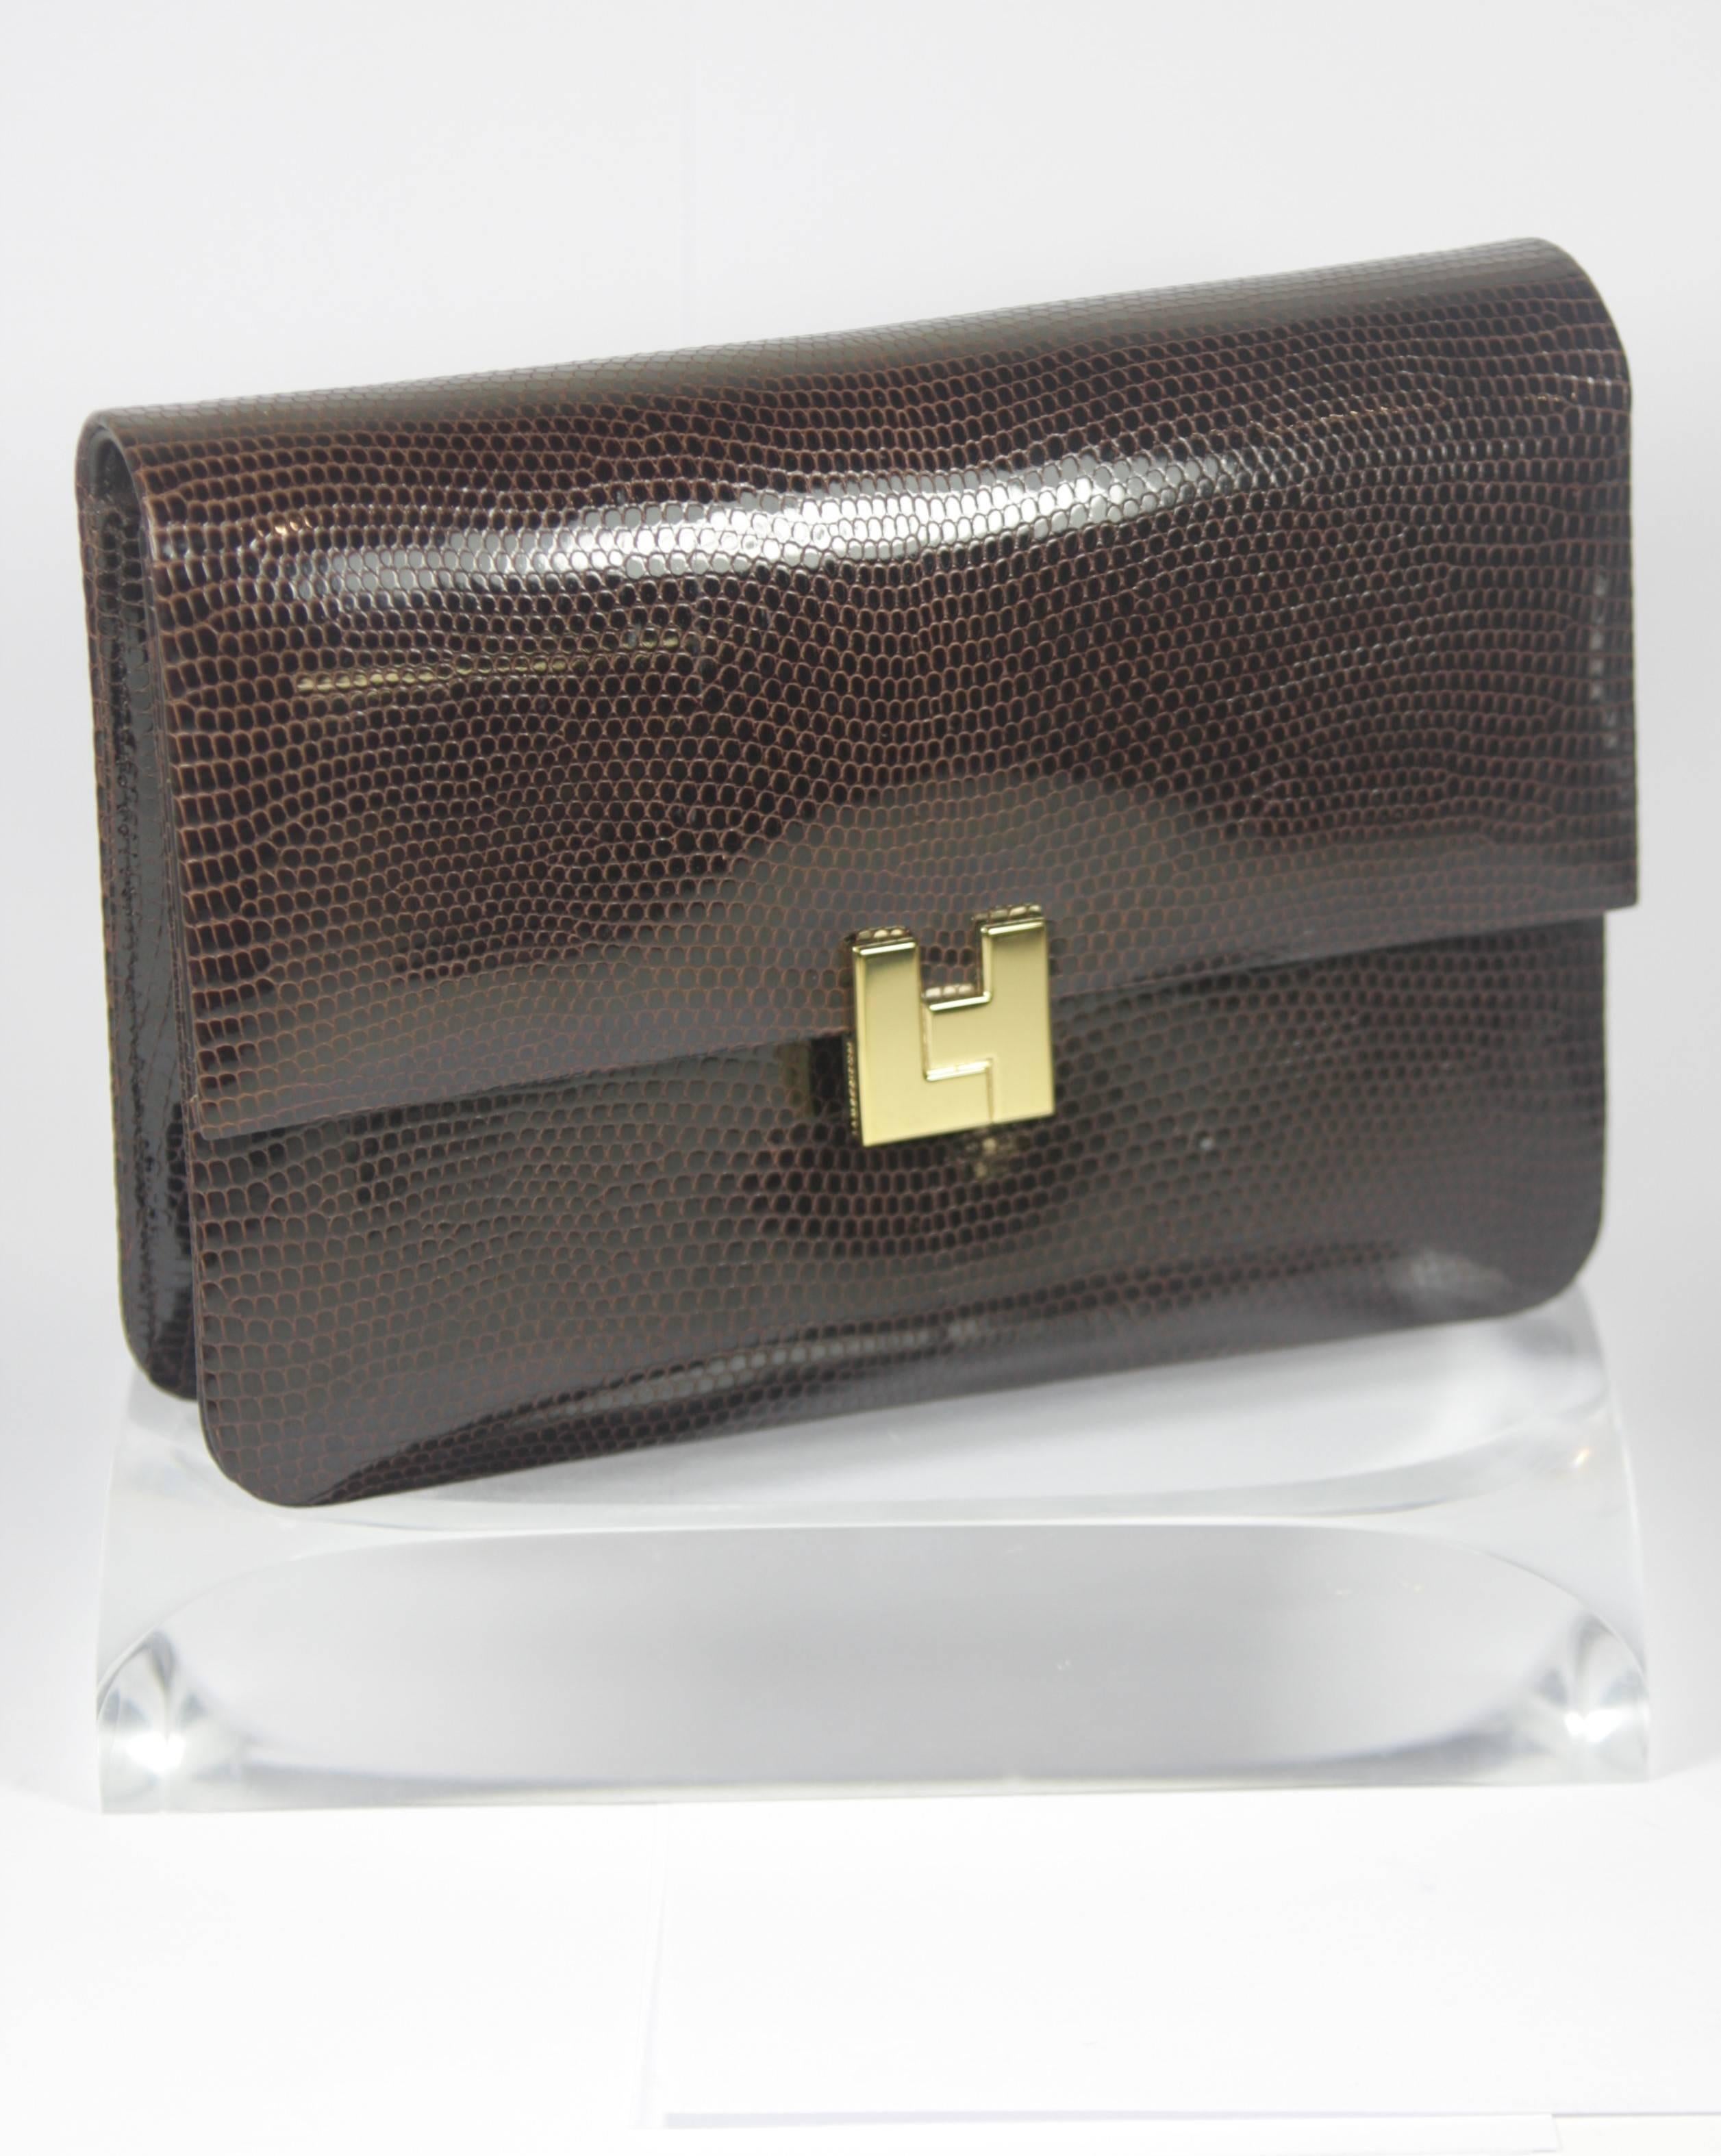 Black LAMBERTSON TRUEX Brown Lizard Clutch with Gold Hardware and Optional Strap